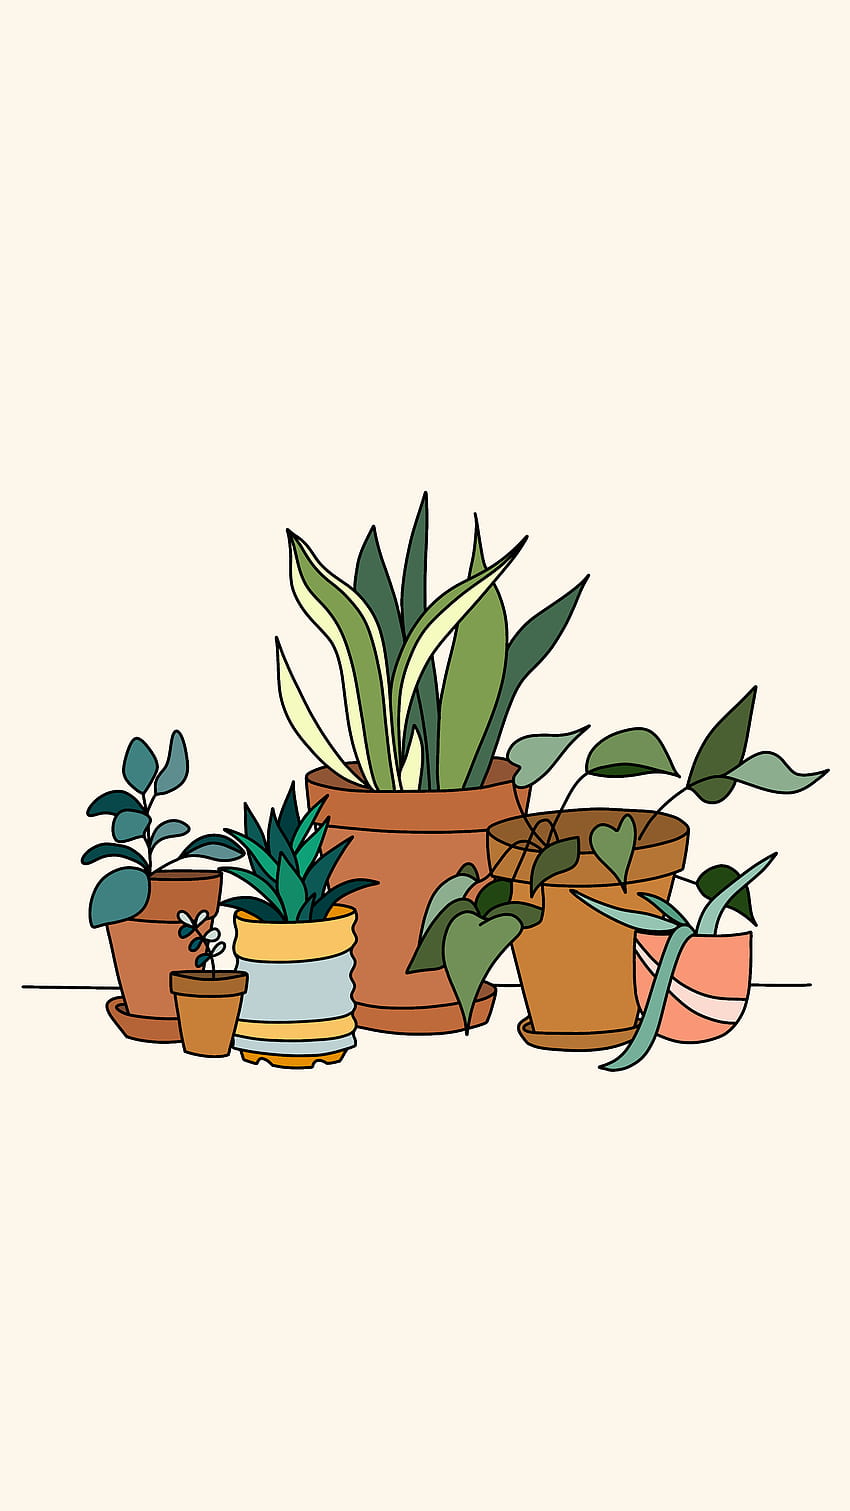 An illustration of several potted plants in front of a white background - May